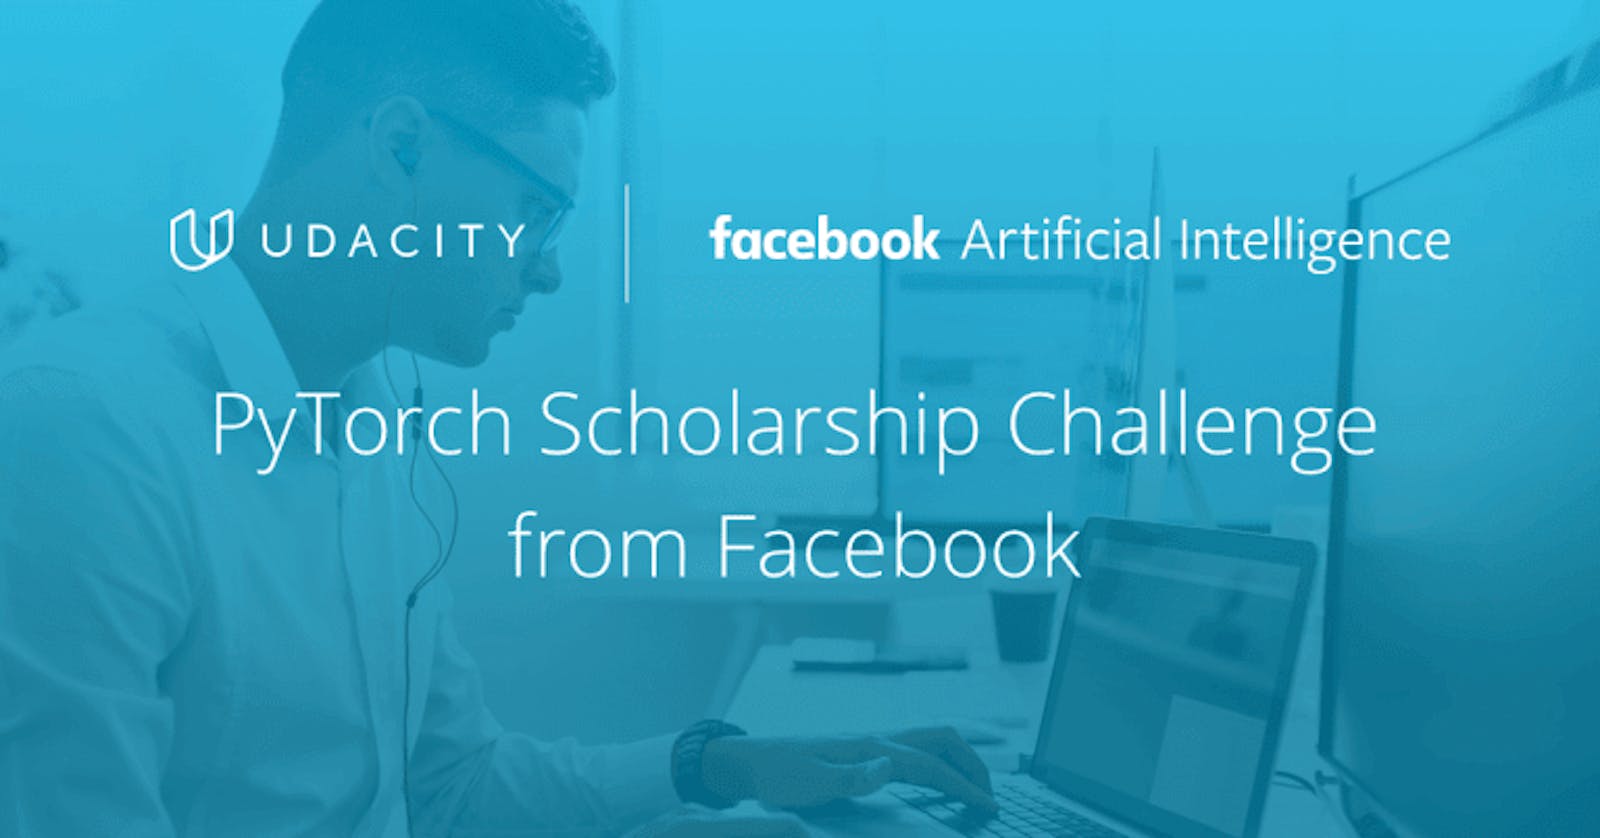 PyTorch Scholarship Challenge from Facebook